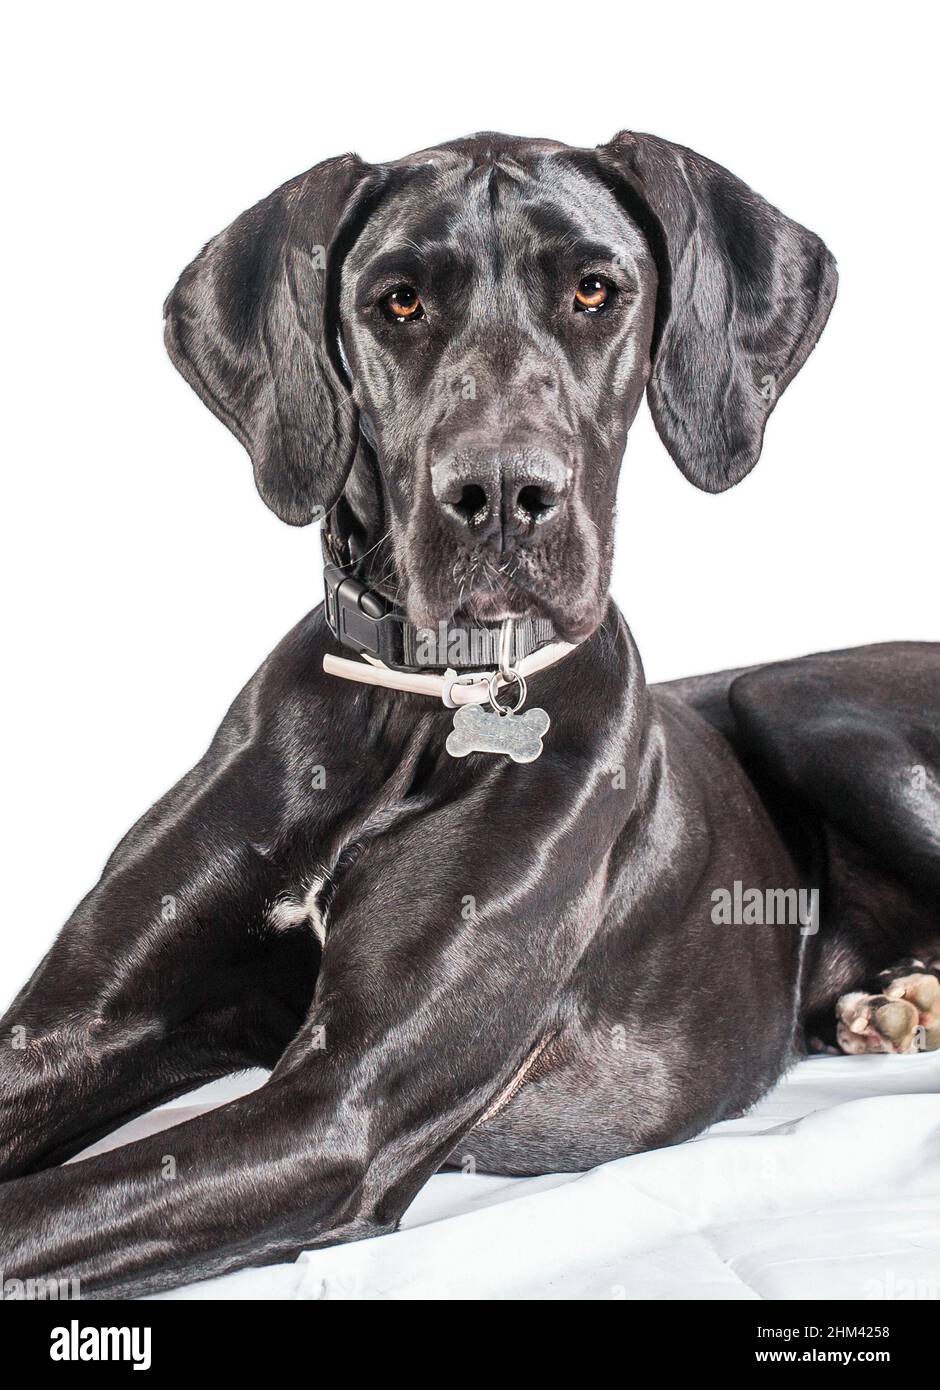 Great Dane dog portrait, one of the largest breeds in the world. Black young female. Isolated over white background Stock Photo